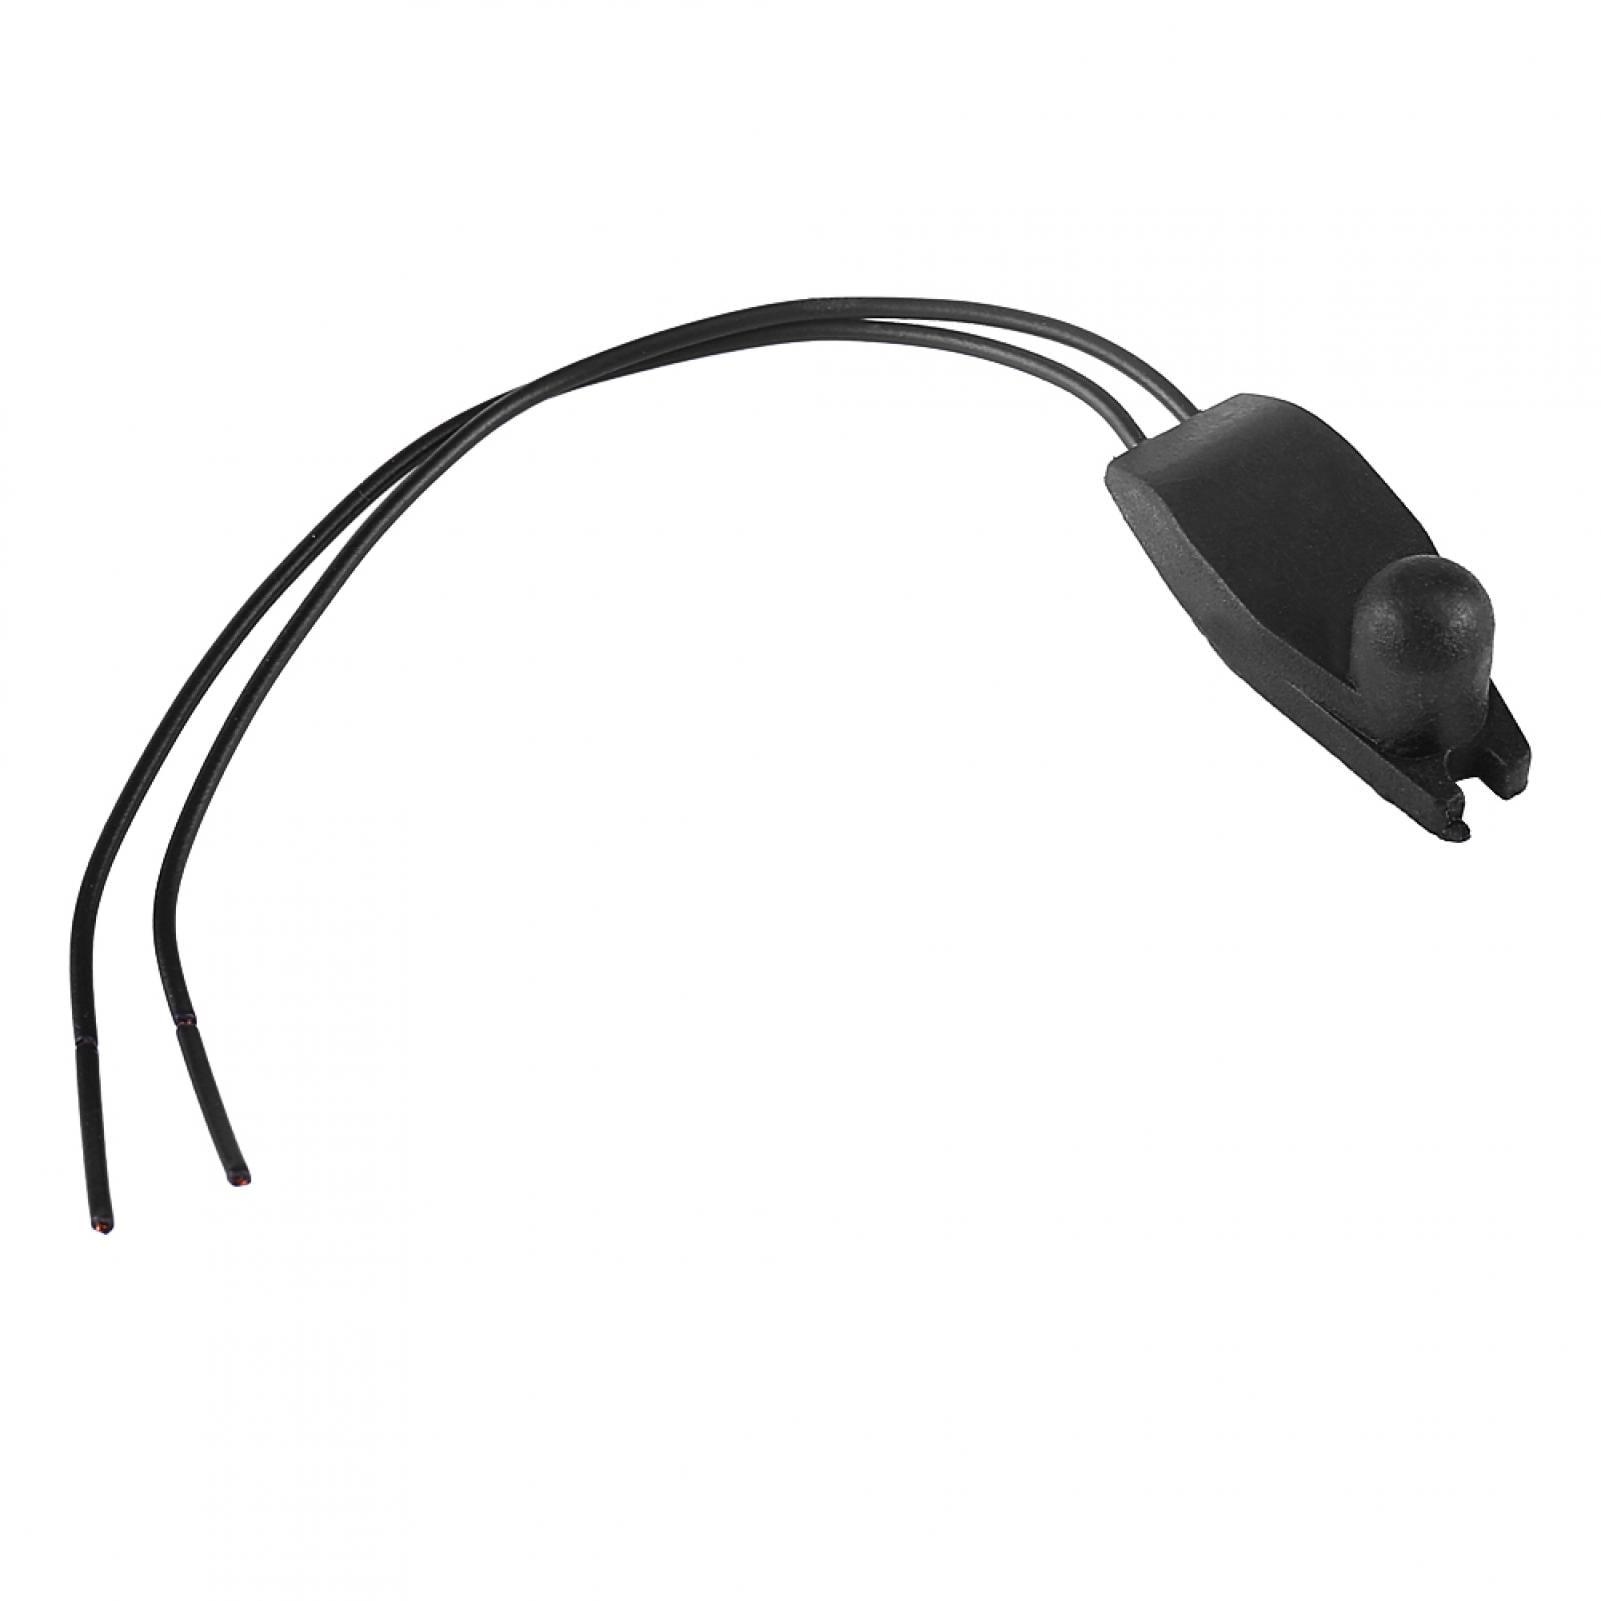 Outdoor Temperature Sensor for Car Reversing Mirror Reference OE Number 6445F9 6445.F9 for 206 207 208 306 307 407 